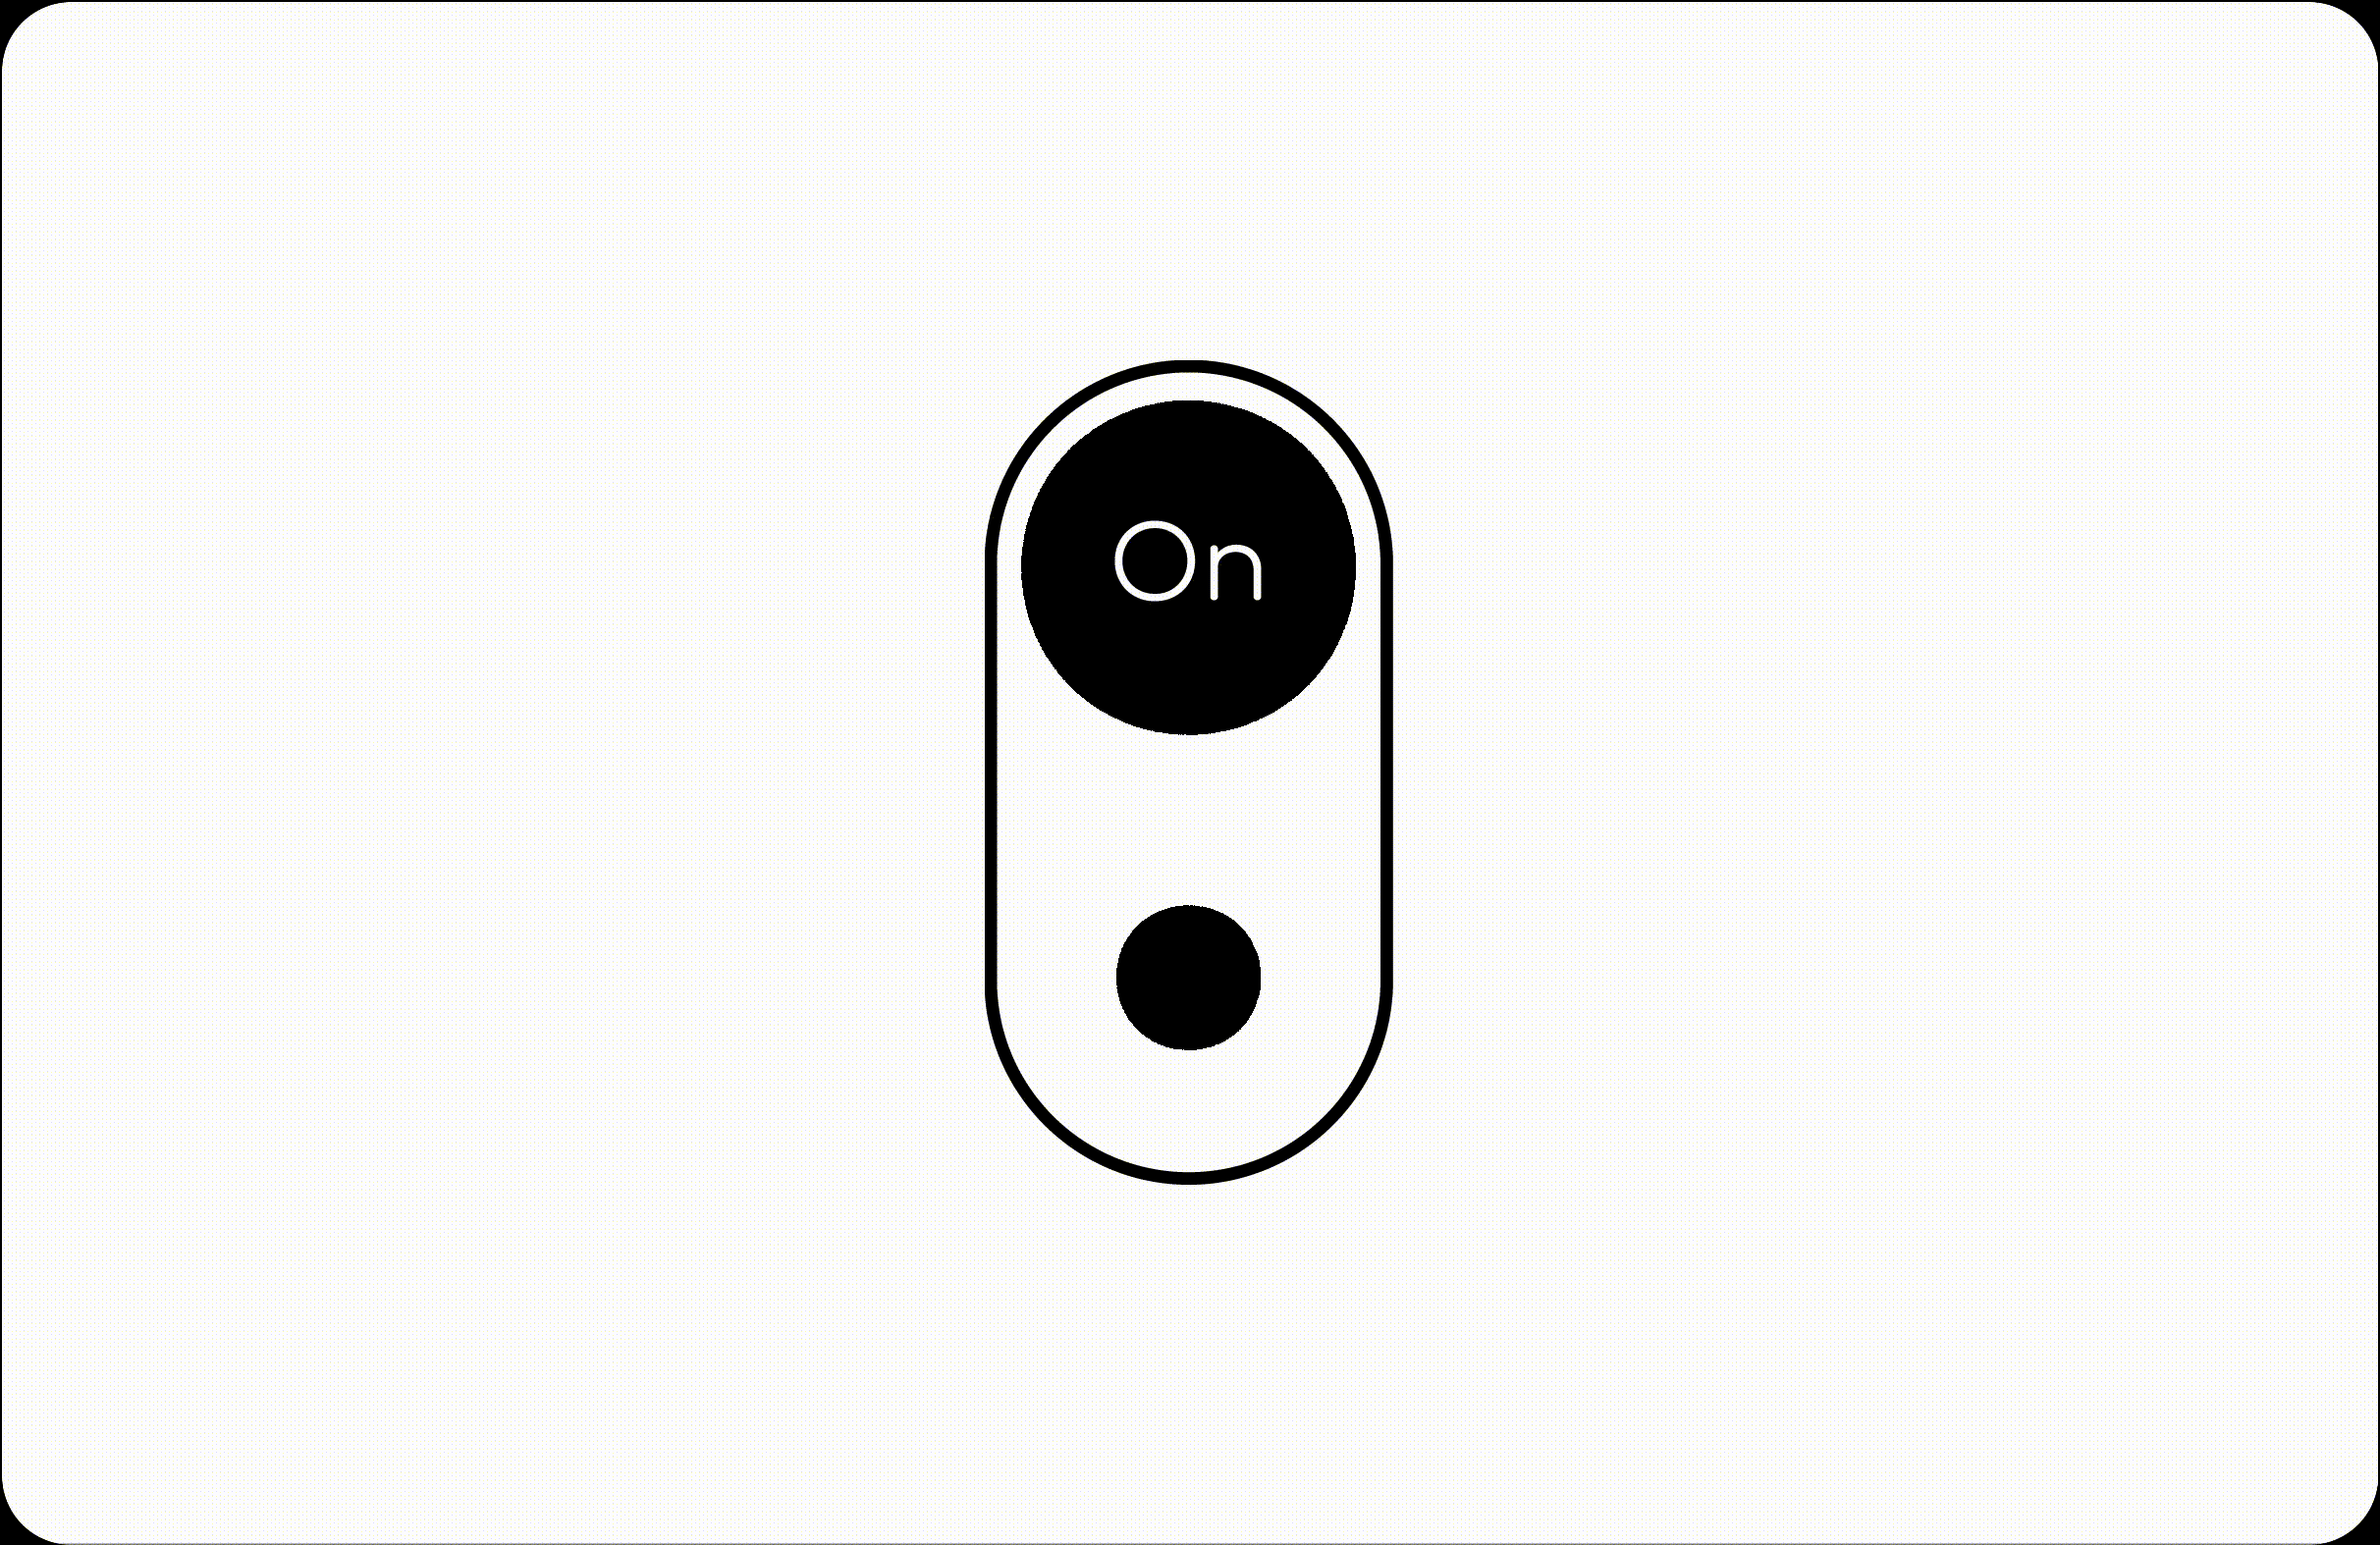 Daily UI :: 015 :: On/Off Switch dailyui